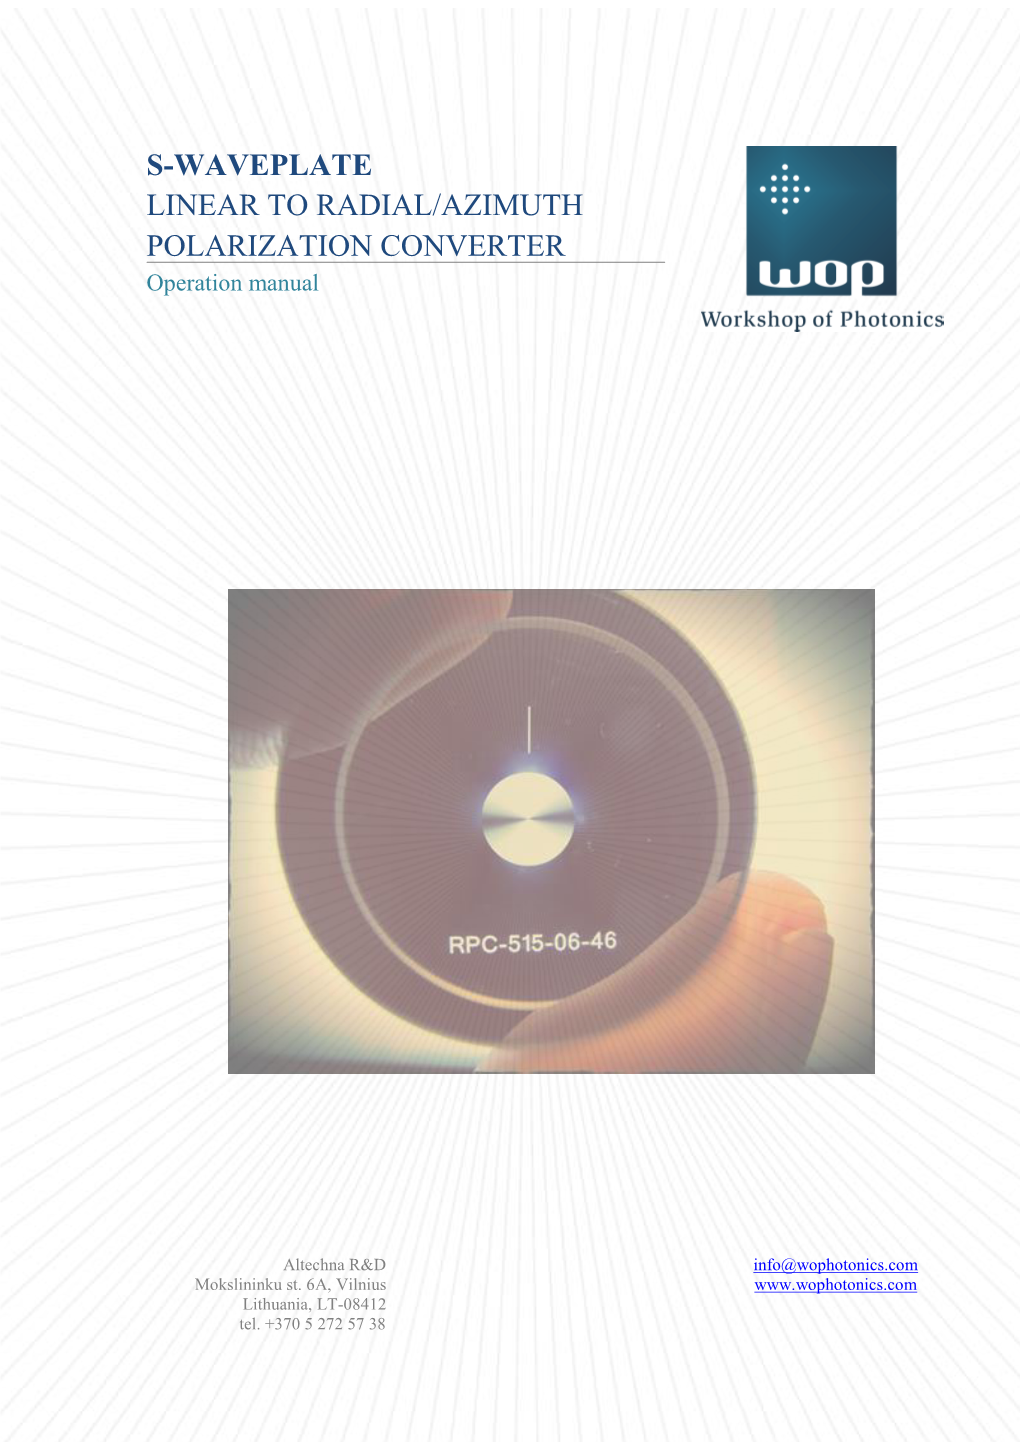 S-WAVEPLATE LINEAR to RADIAL/AZIMUTH POLARIZATION CONVERTER Operation Manual